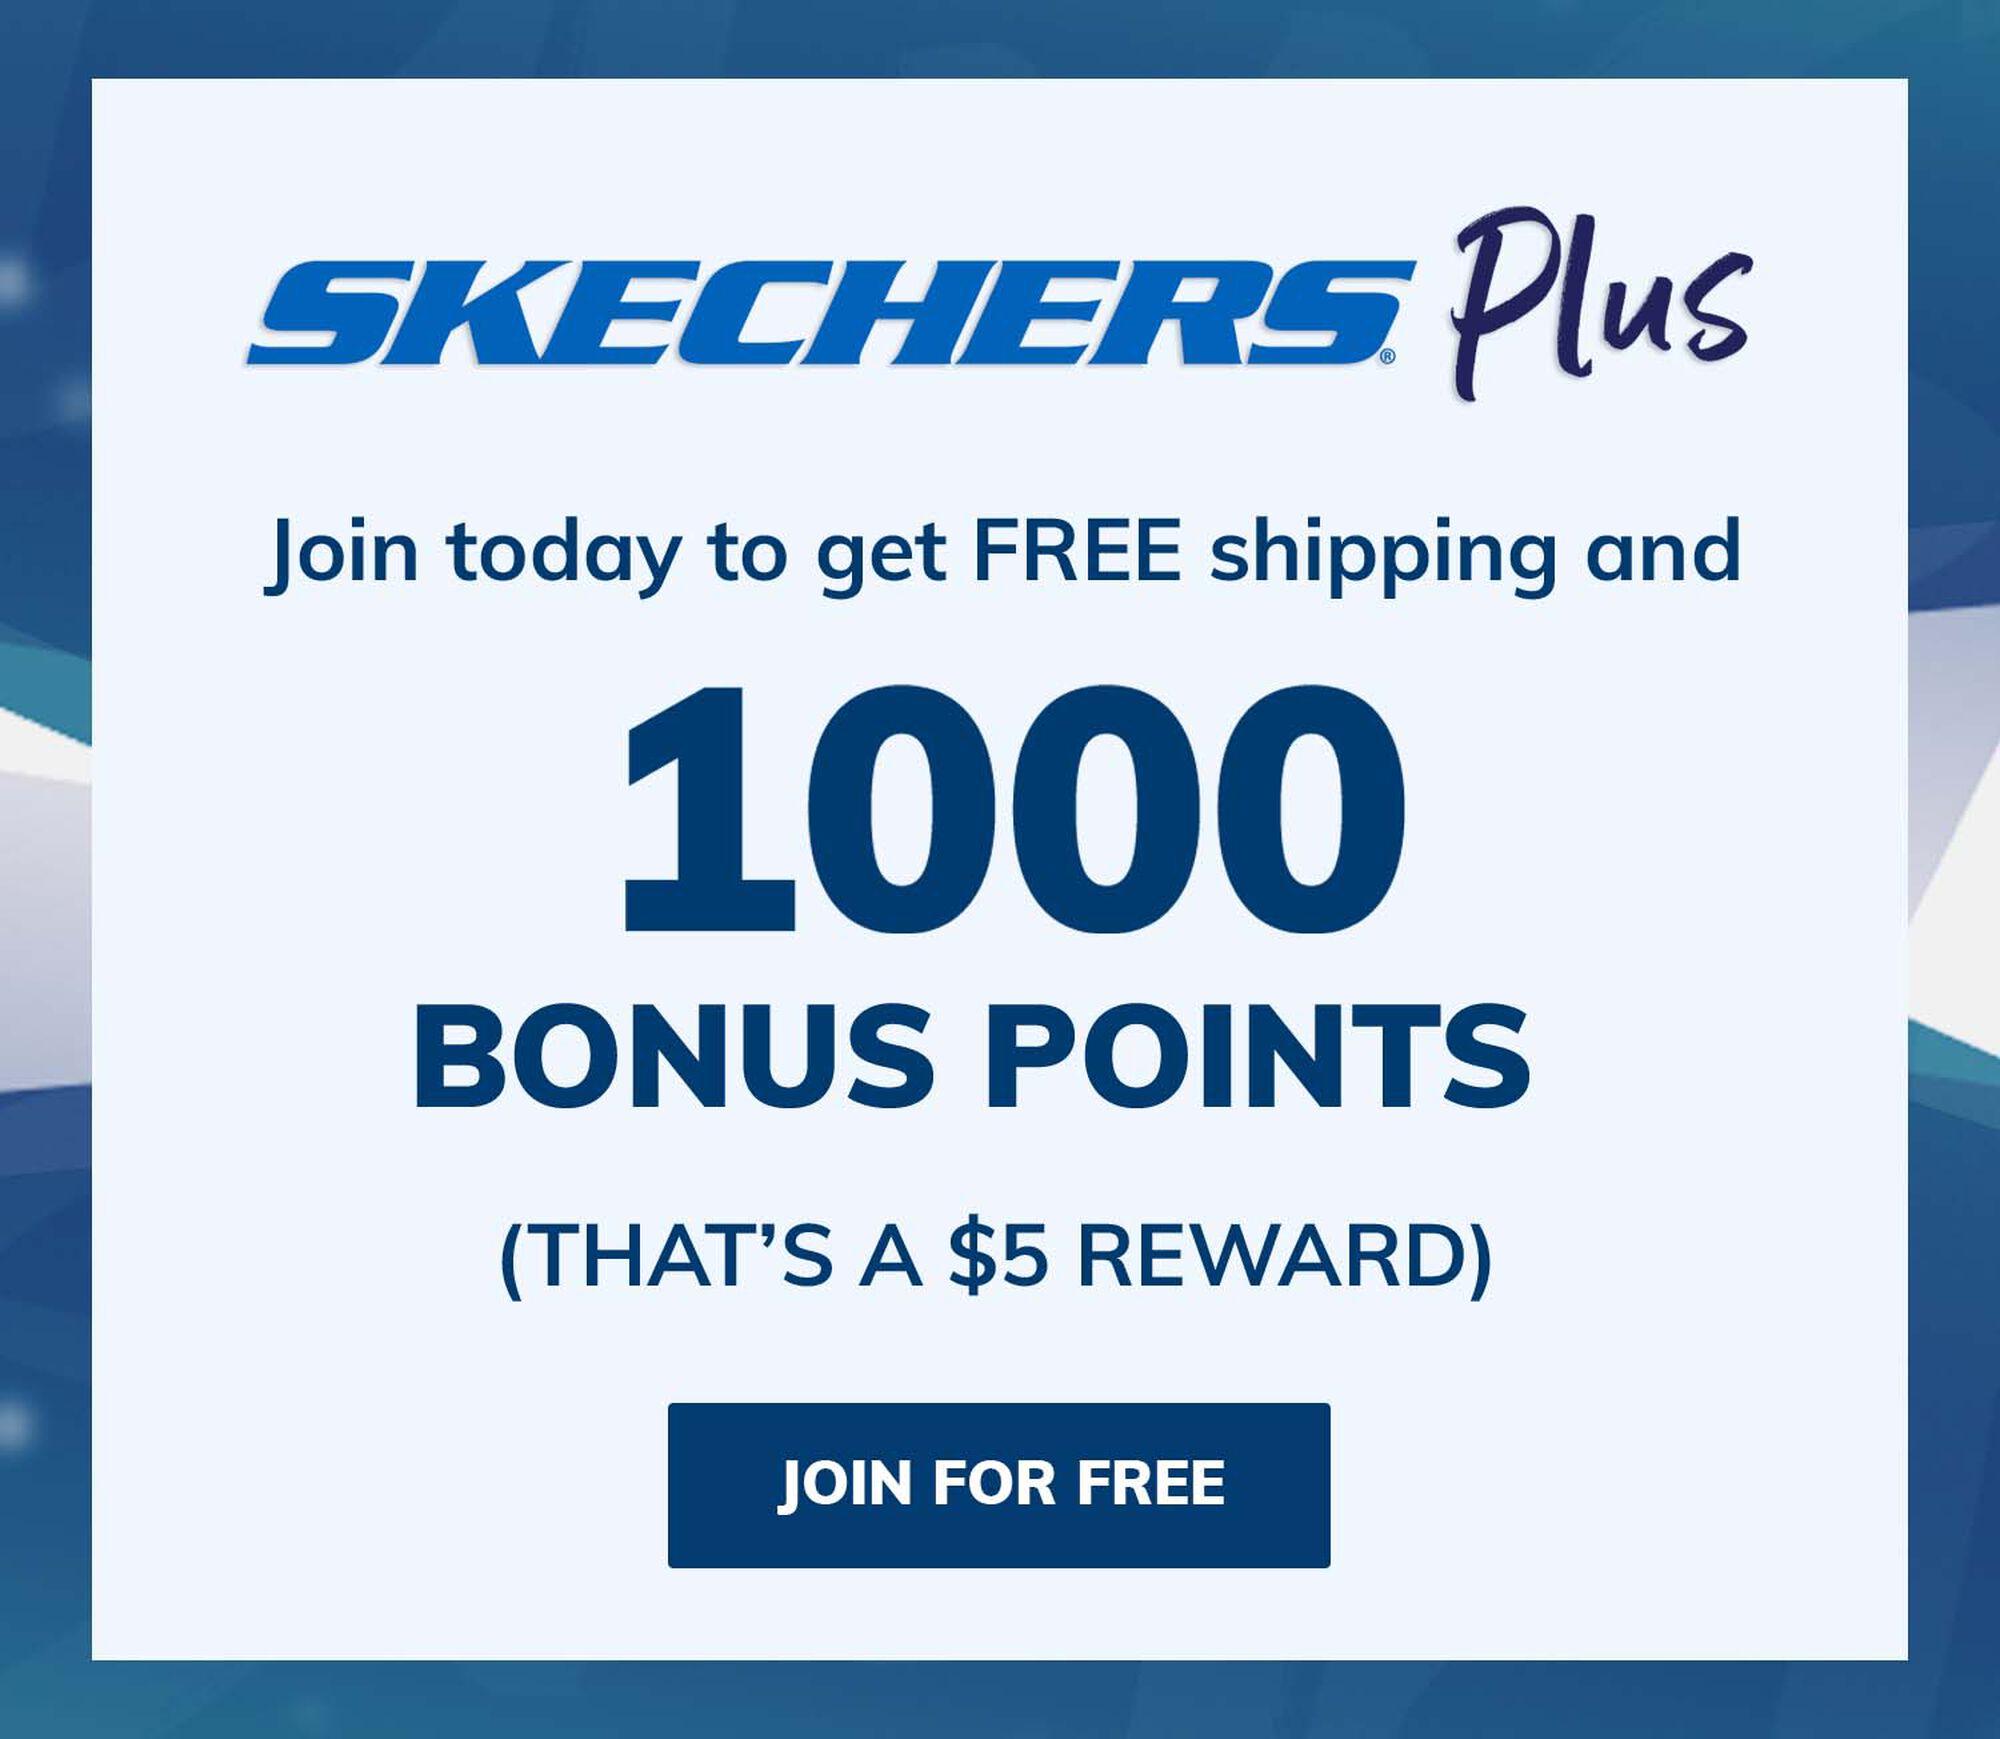 Official 20 Off Coupon, Promo Codes, Free Shipping SKECHERS